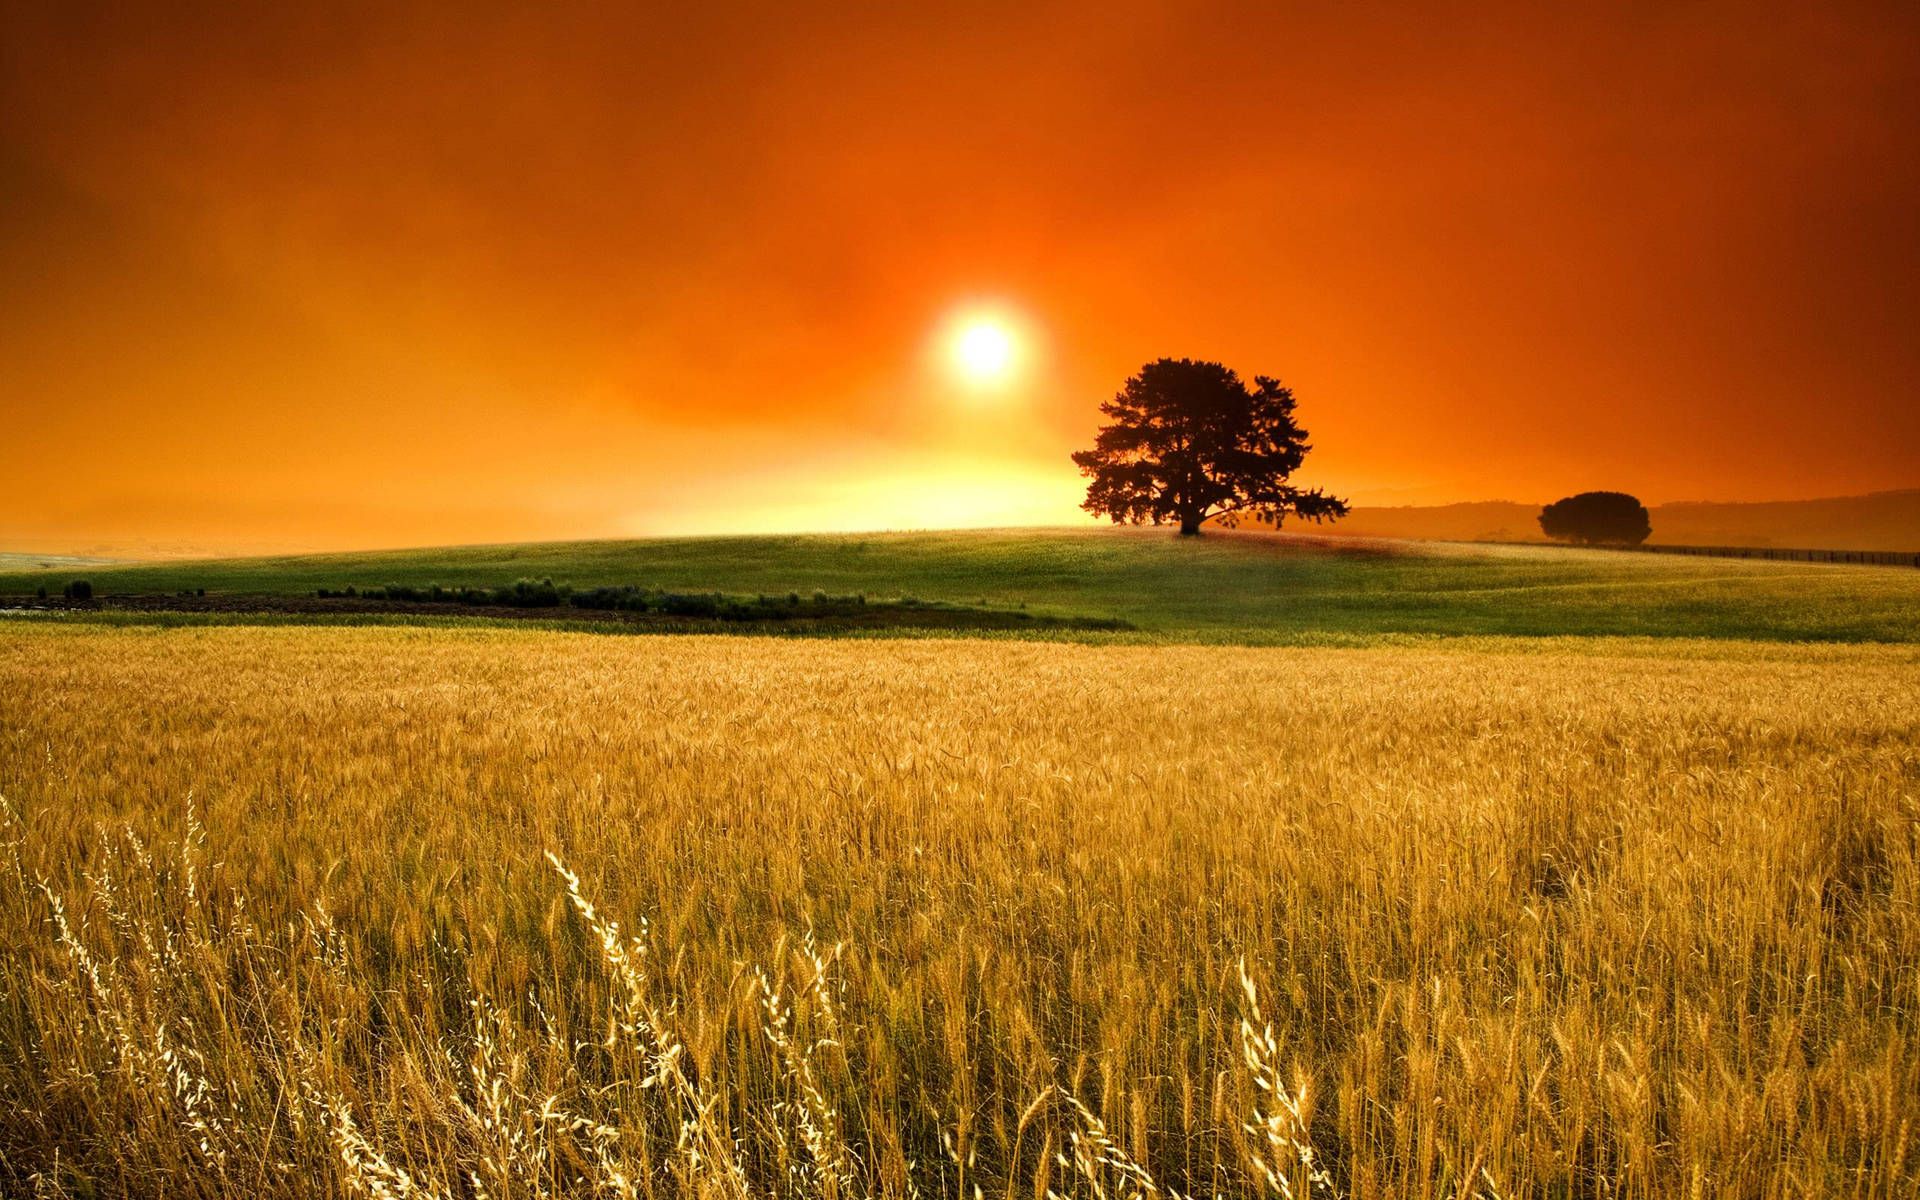 Golden wheat field with a tree in the distance - Farm